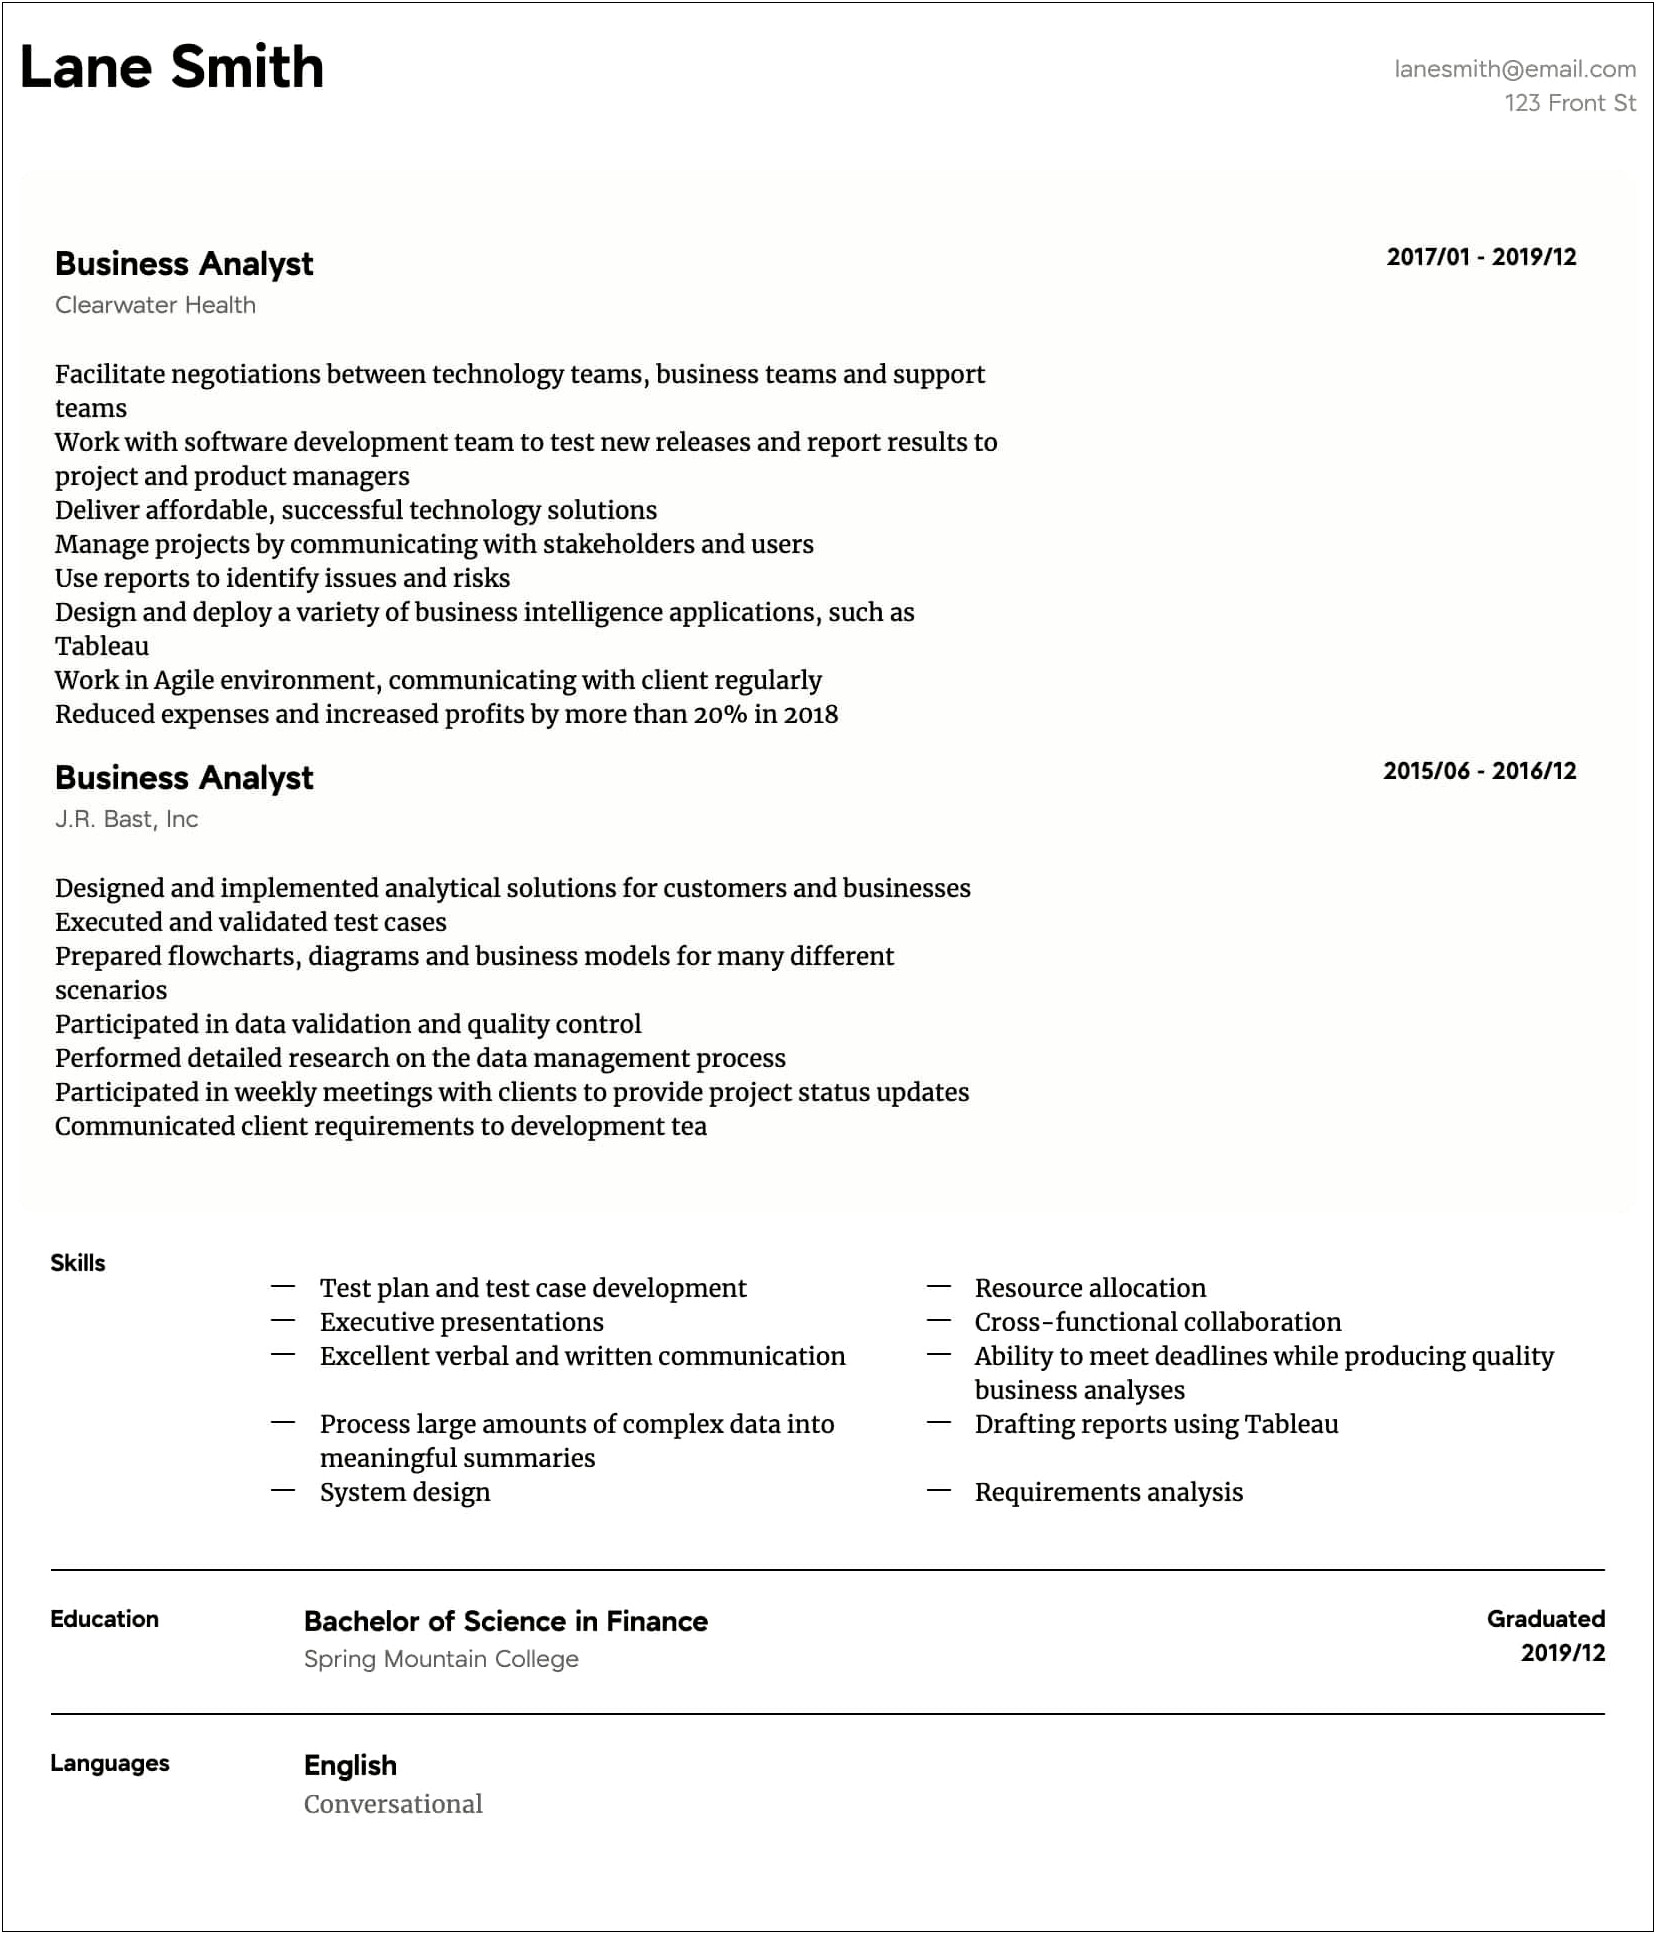 Sample Objectives For Business Analyst Resume